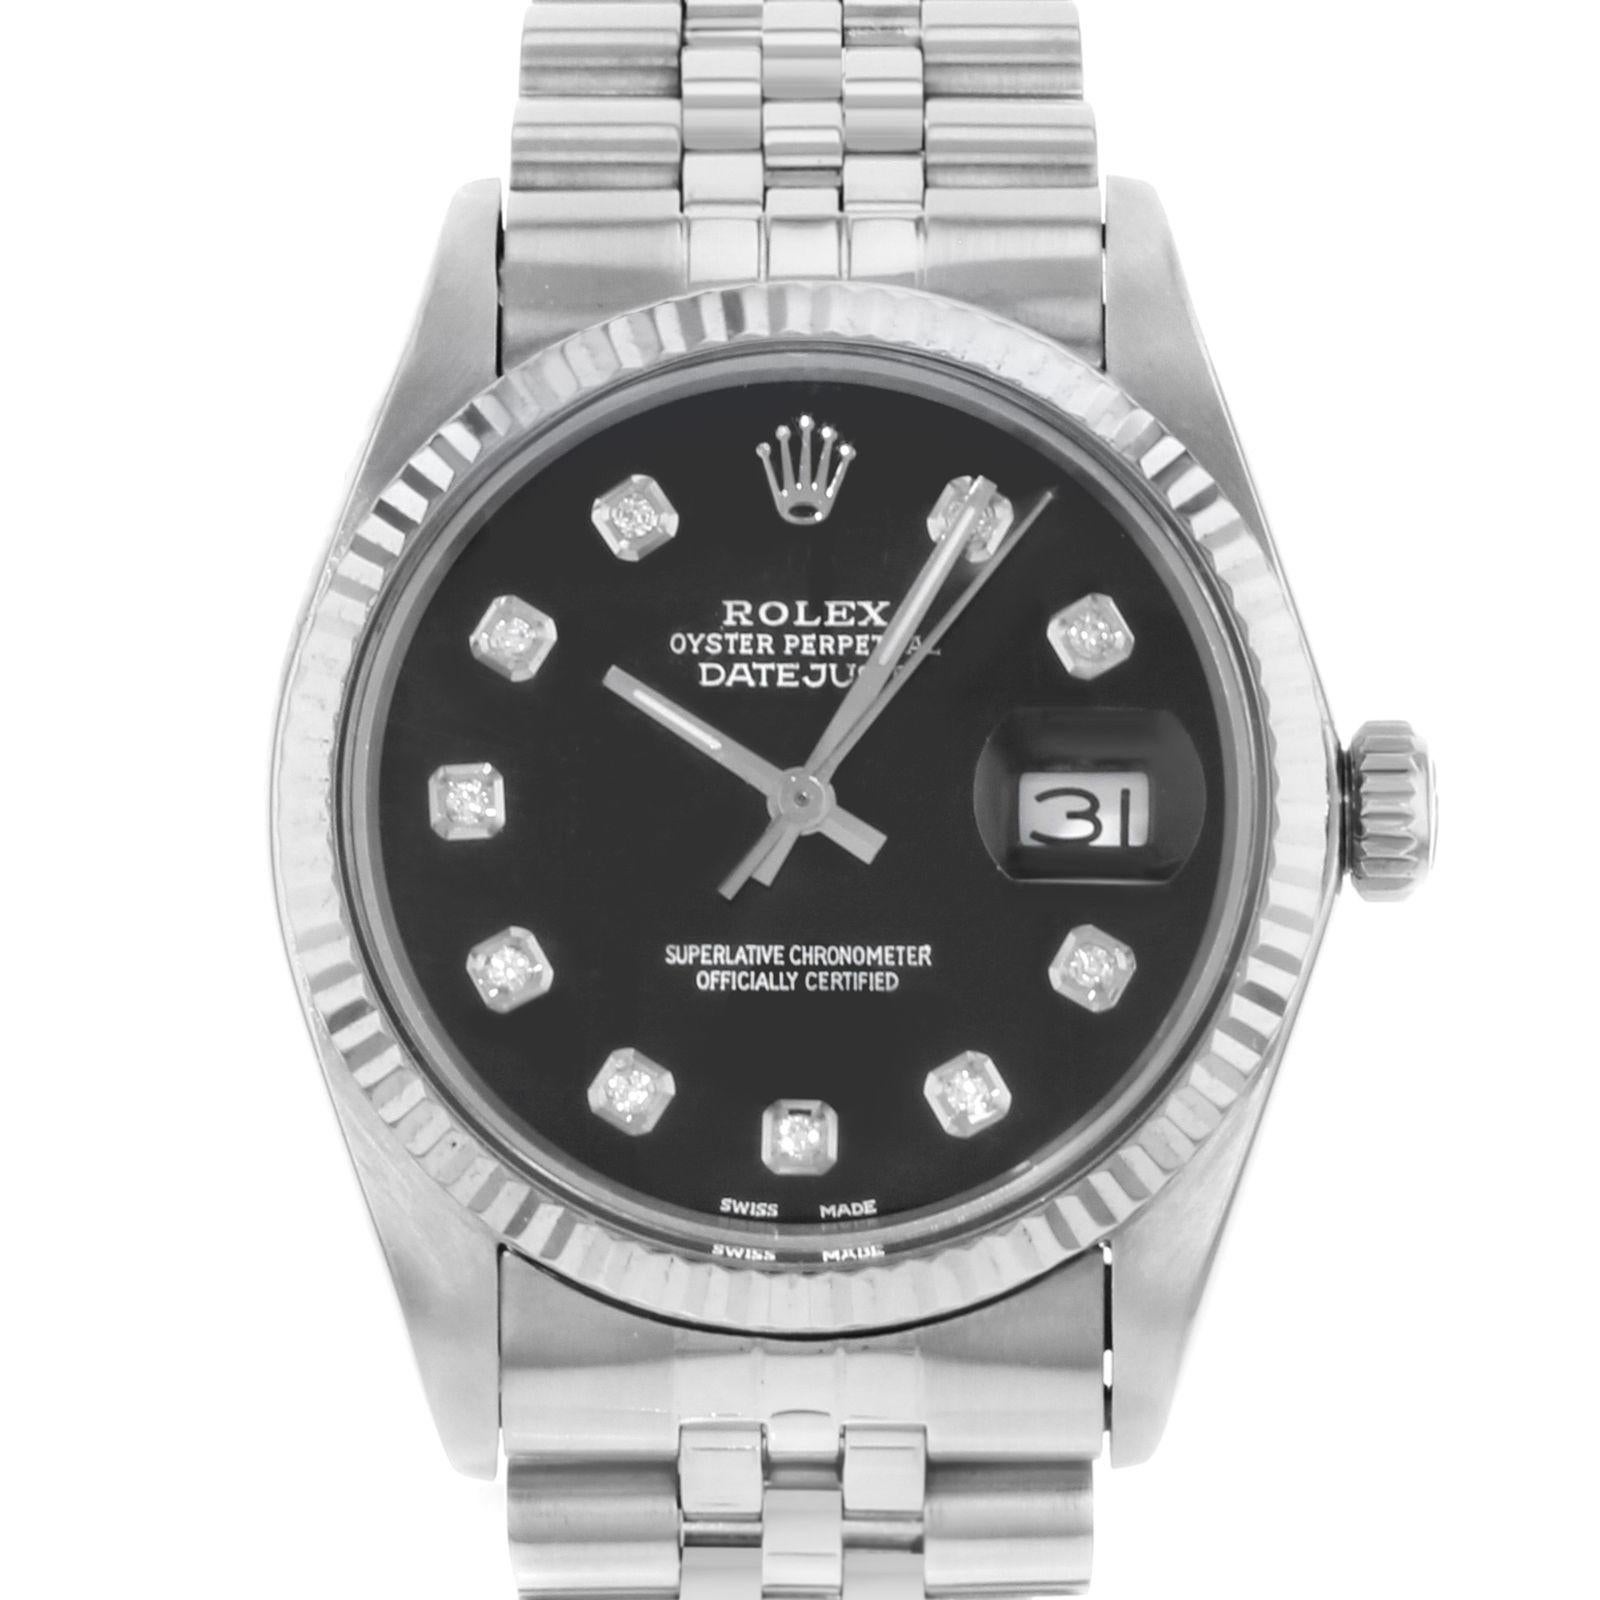 (20337)
This pre-owned Rolex Datejust 16014 is a beautiful men's timepiece that is powered by an automatic movement which is cased in a stainless steel case. It has a round shape face, date, diamonds dial and has hand diamonds style markers. It is